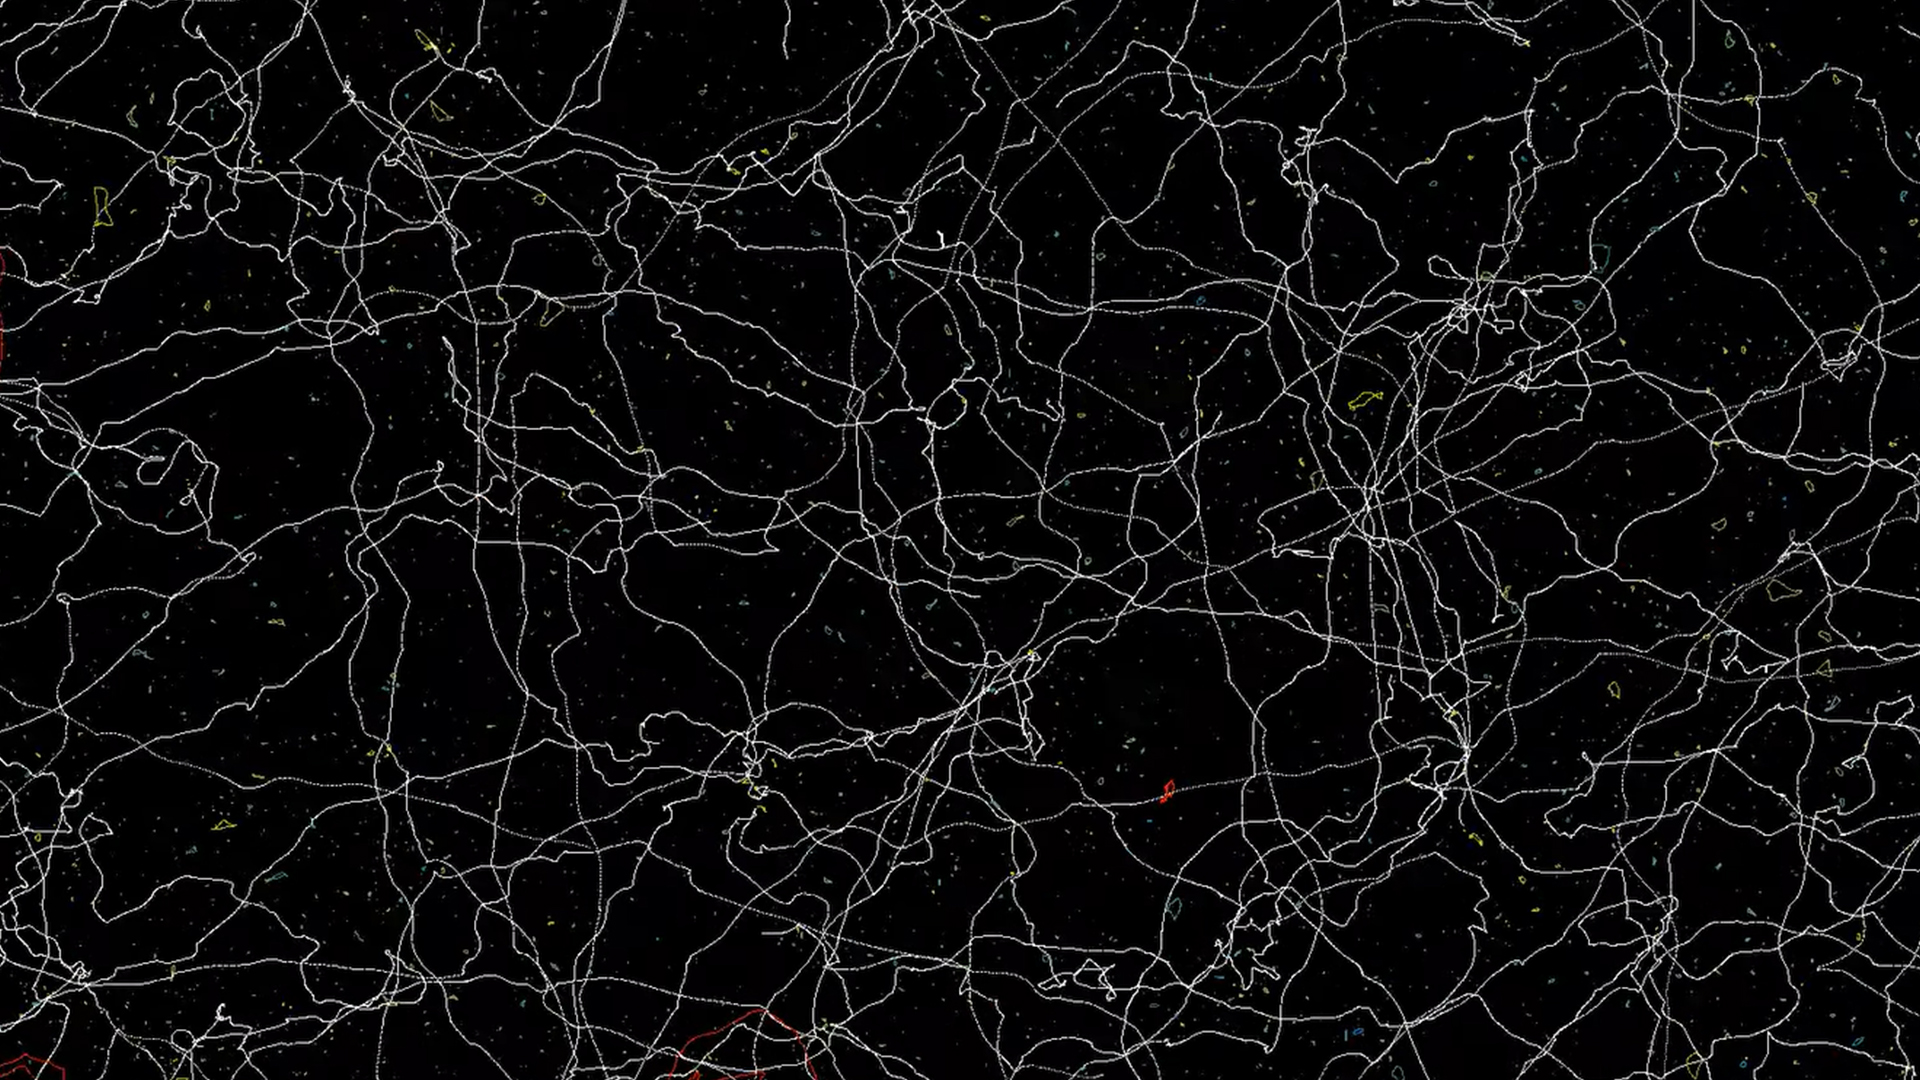 Cosmic Strings: Untangling the Universe's Fabric